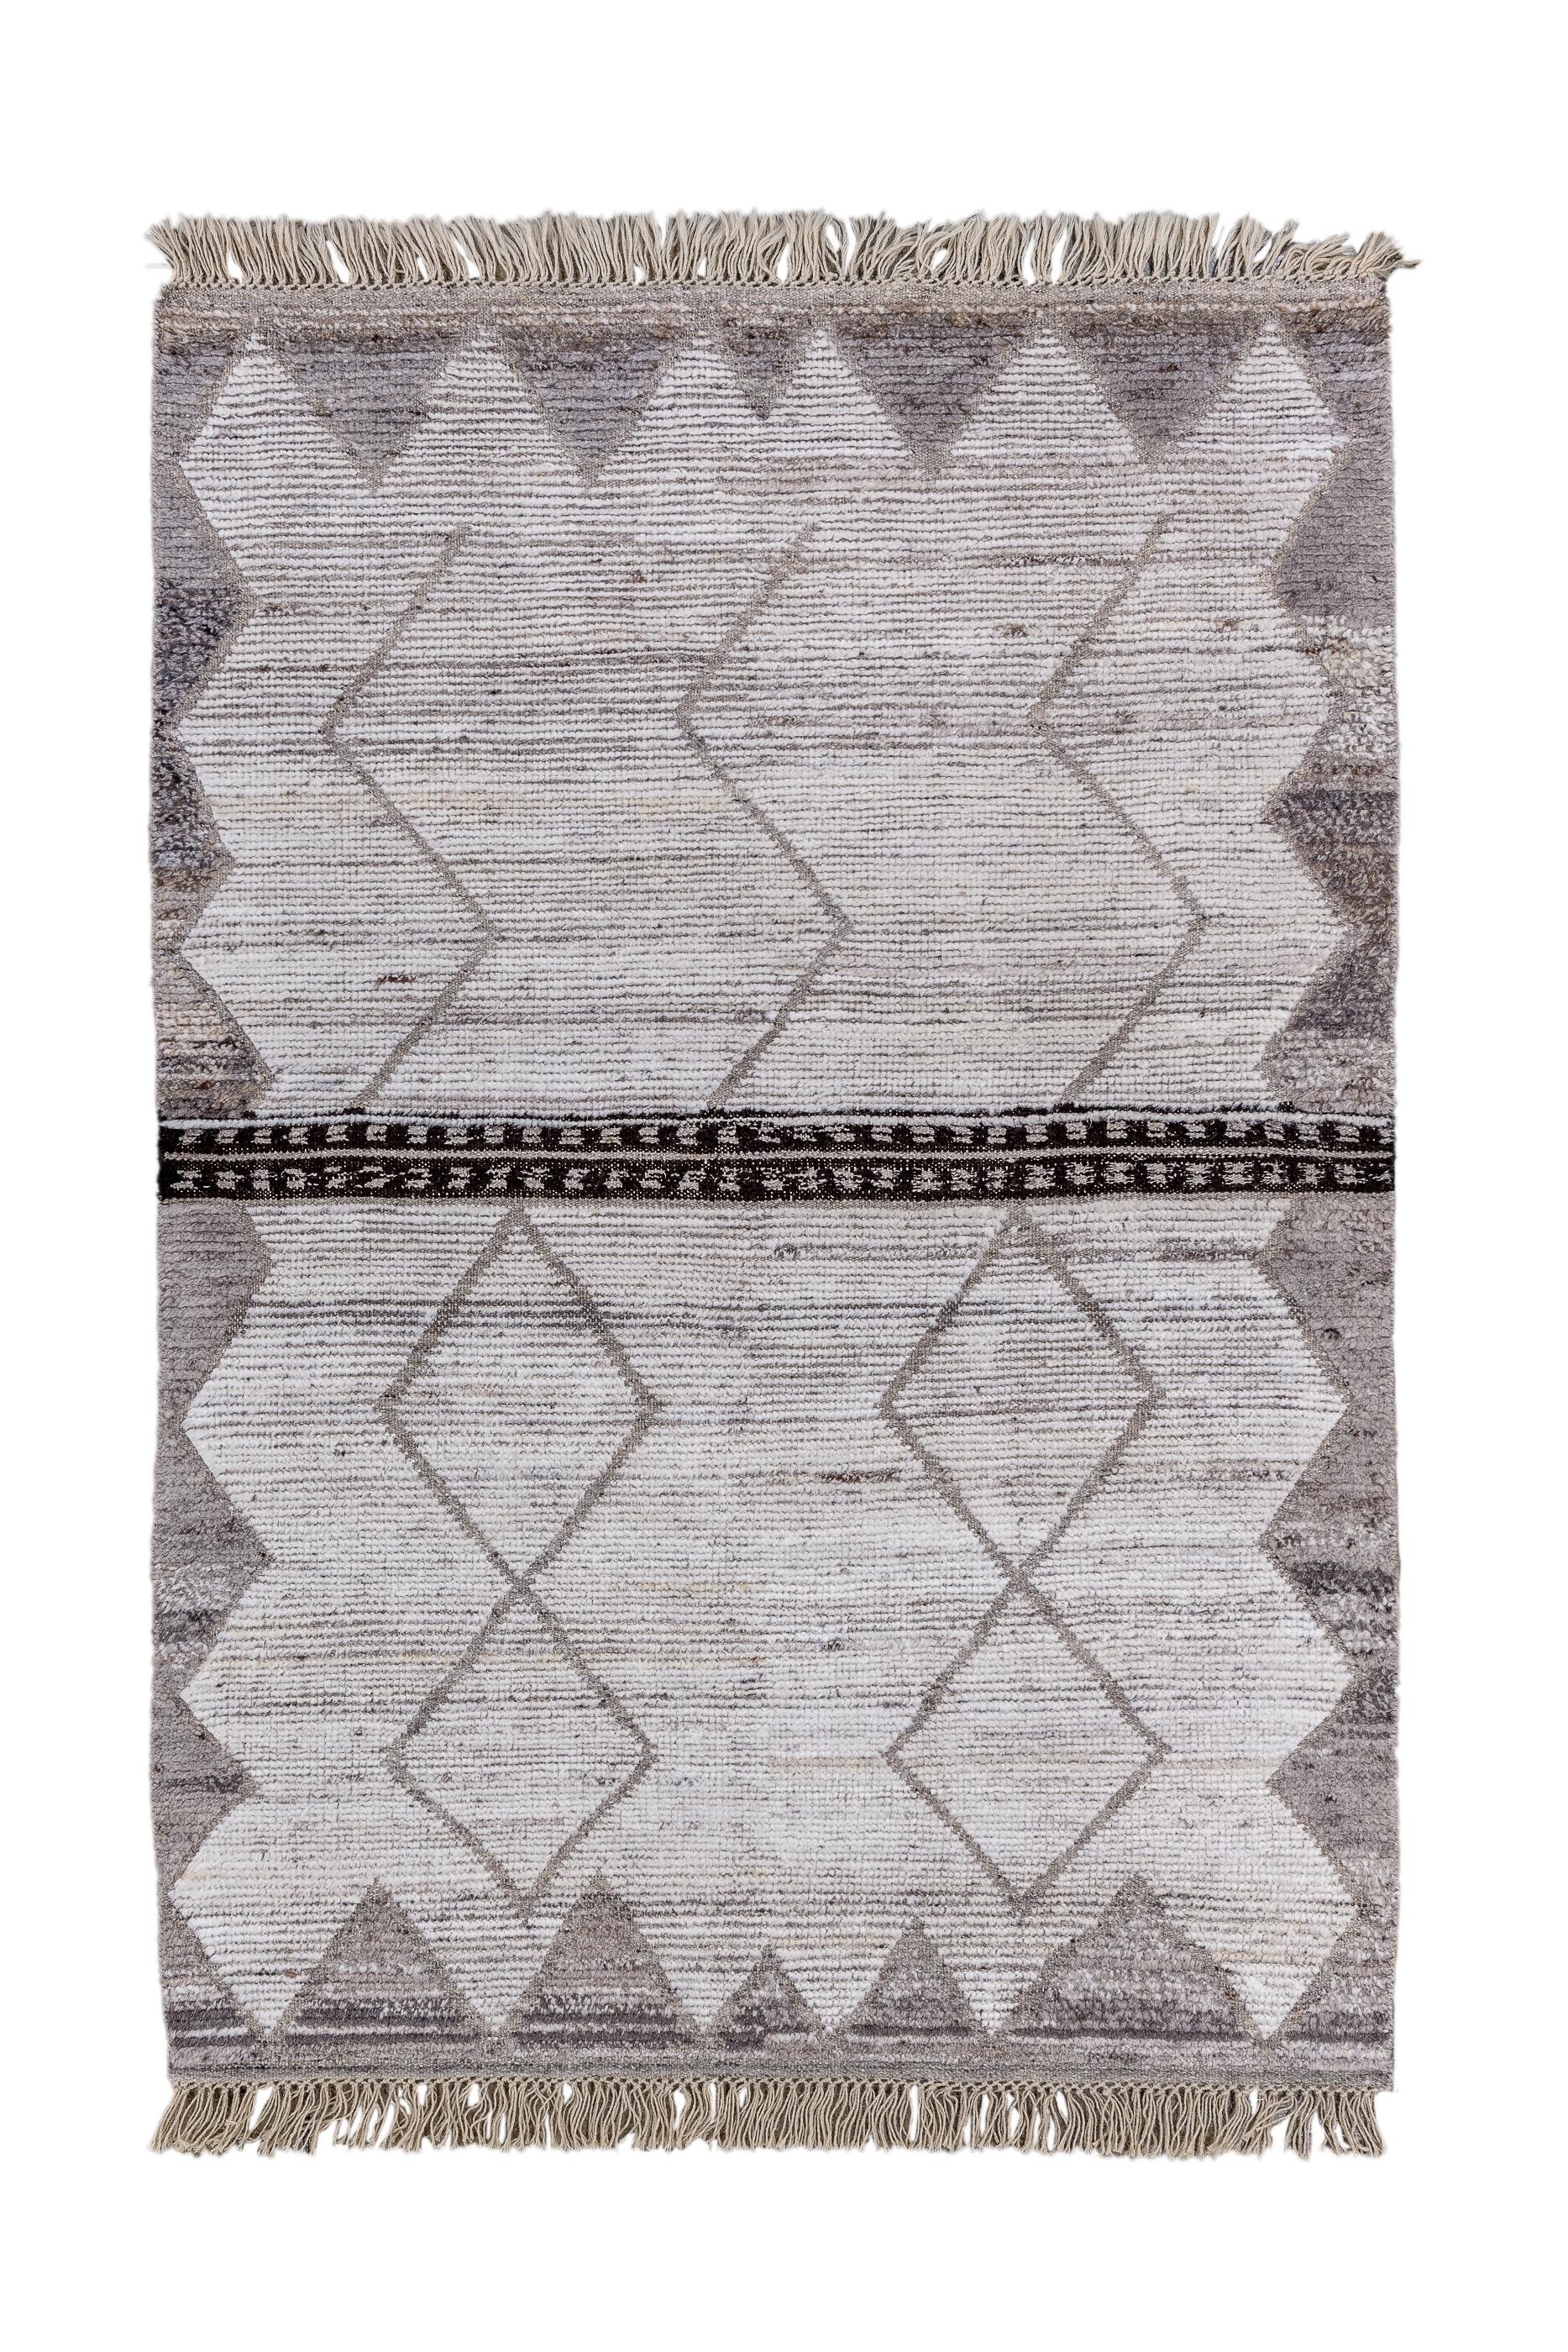 Long pile Turkish rustic Tulu rugs are a relatively recent innovation. This one is very coarsely woven, with a flat pile and numerous wefts. The ecru beige field shows a strong horizontal, bipartite band, dividing zig-zag and lozenge decorated